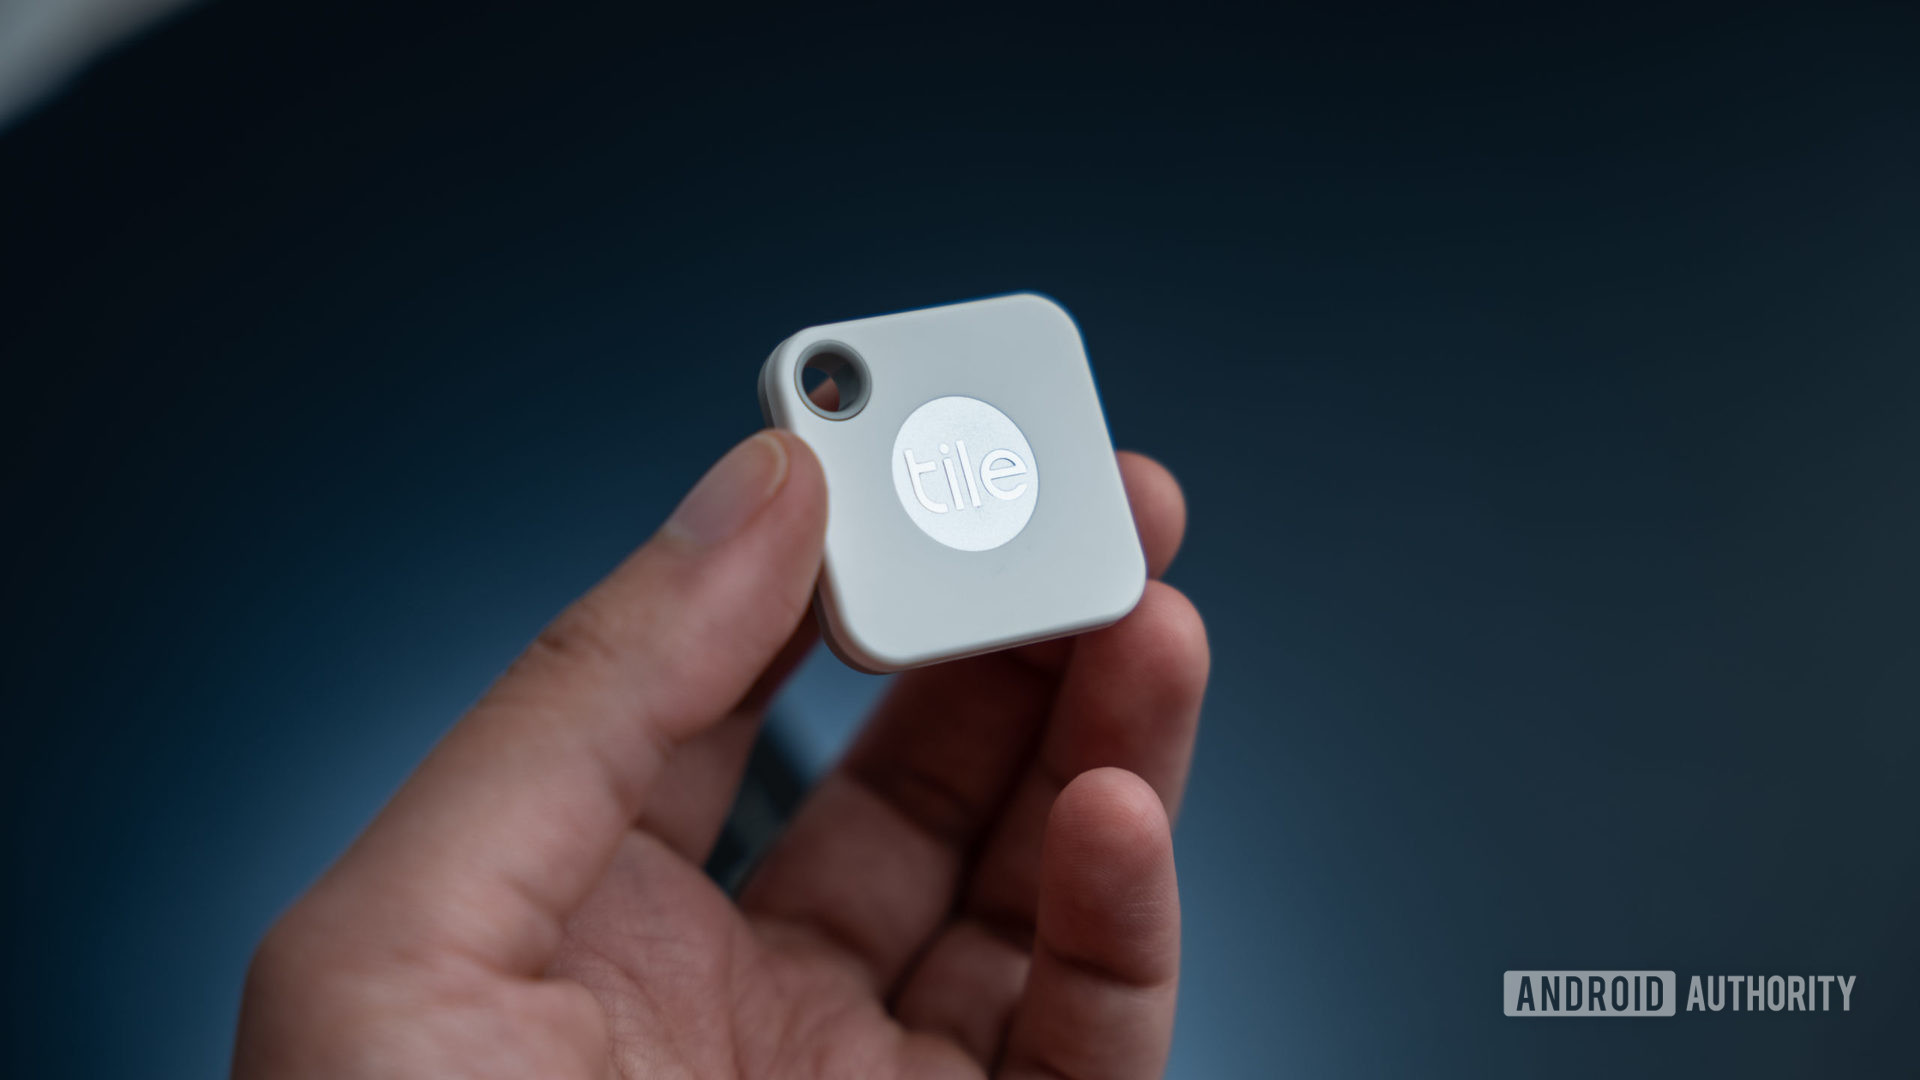 The Tile Mate Tracker in hand showing the Tile logo.